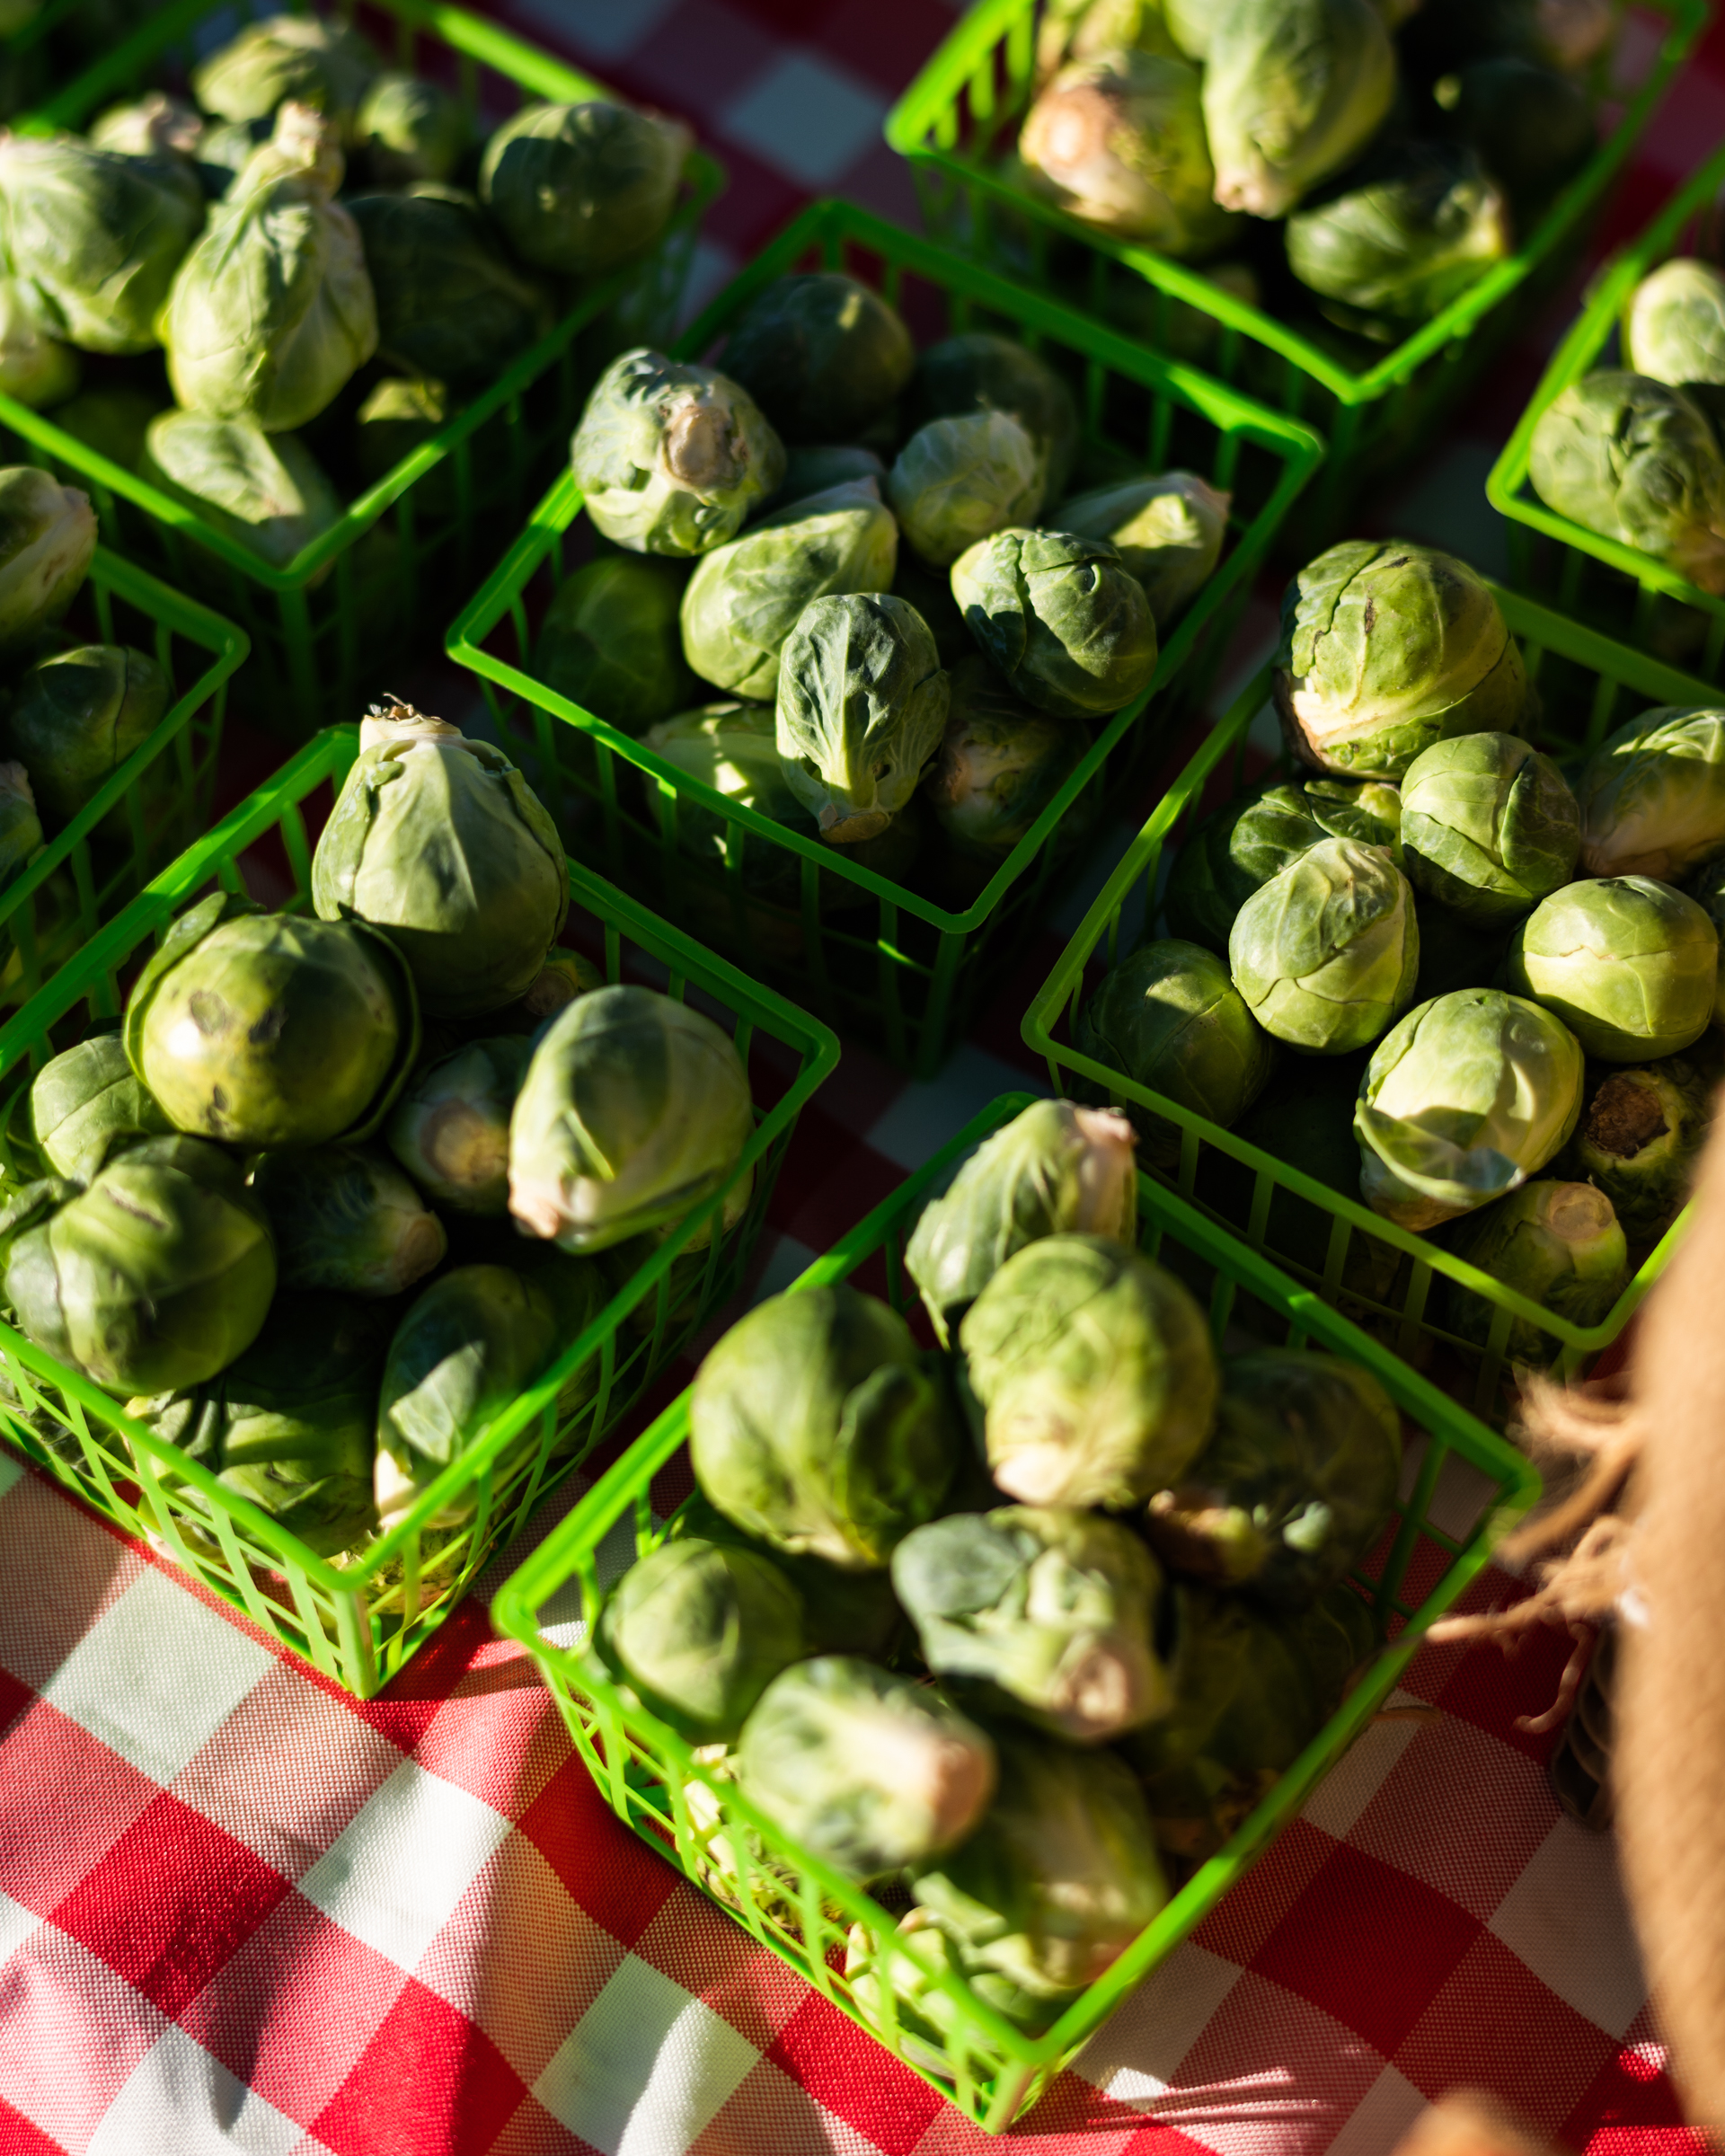 Pint baskets of Brussels sprouts for sale